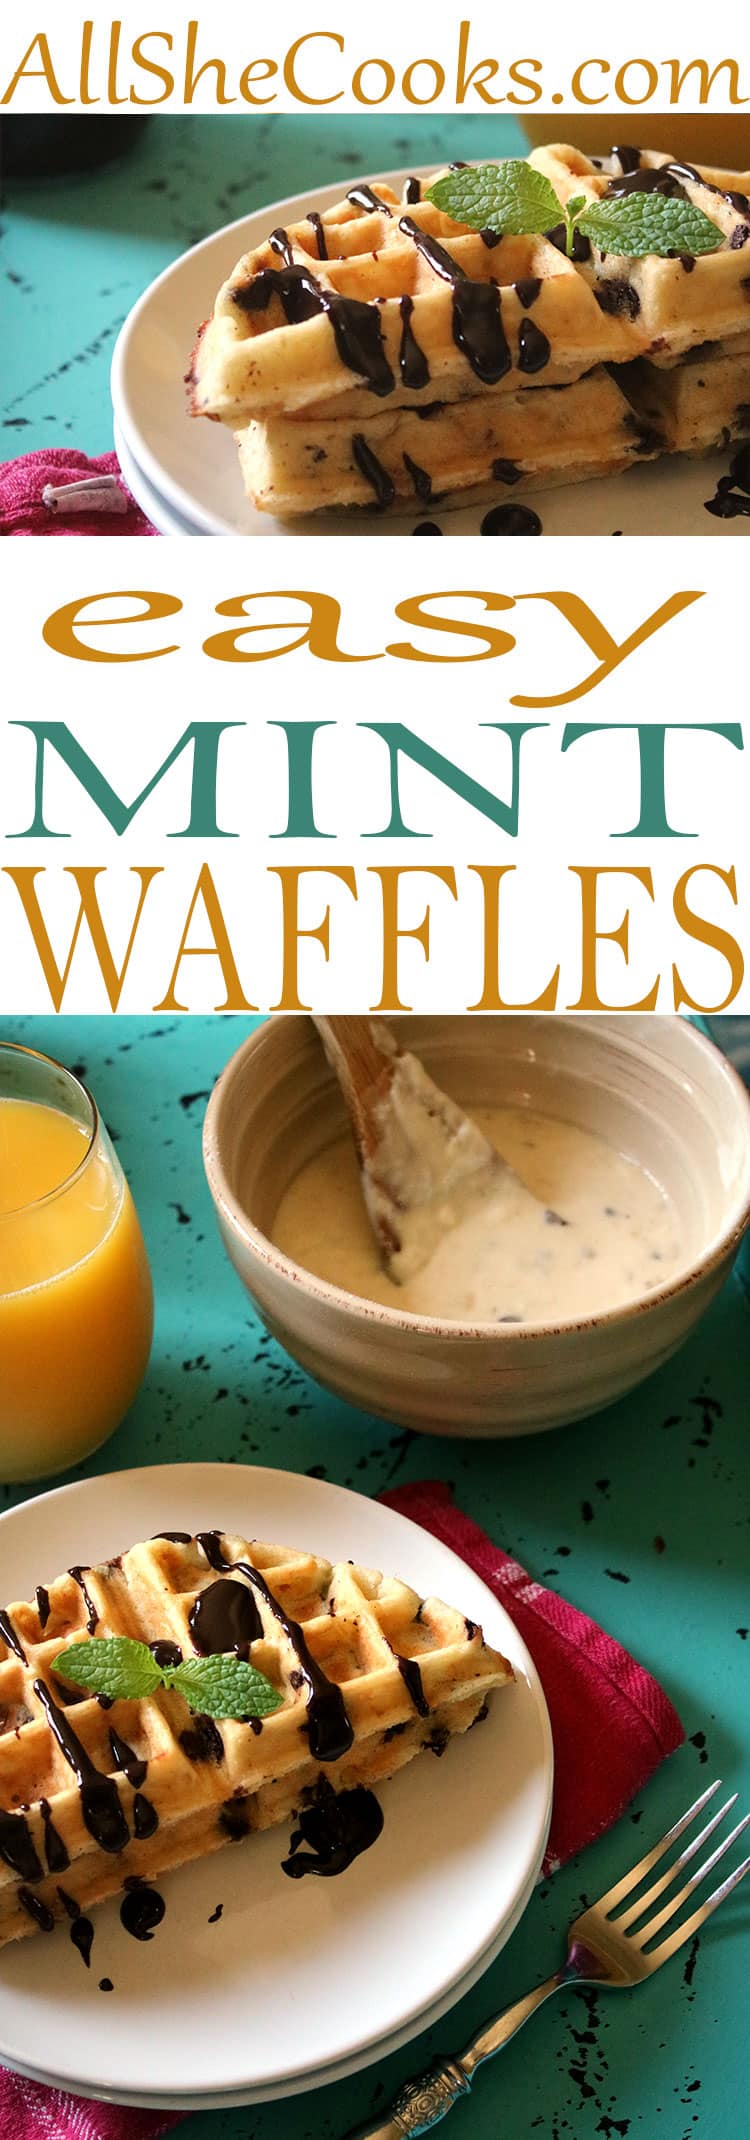 These waffles are better than restaurant waffles. Mix up batter with this Homemade Mint Waffles Recipe and have breakfast on the table in no time. #waffles #mintrecipes #bananawaffles #easybreakfast #chocolate